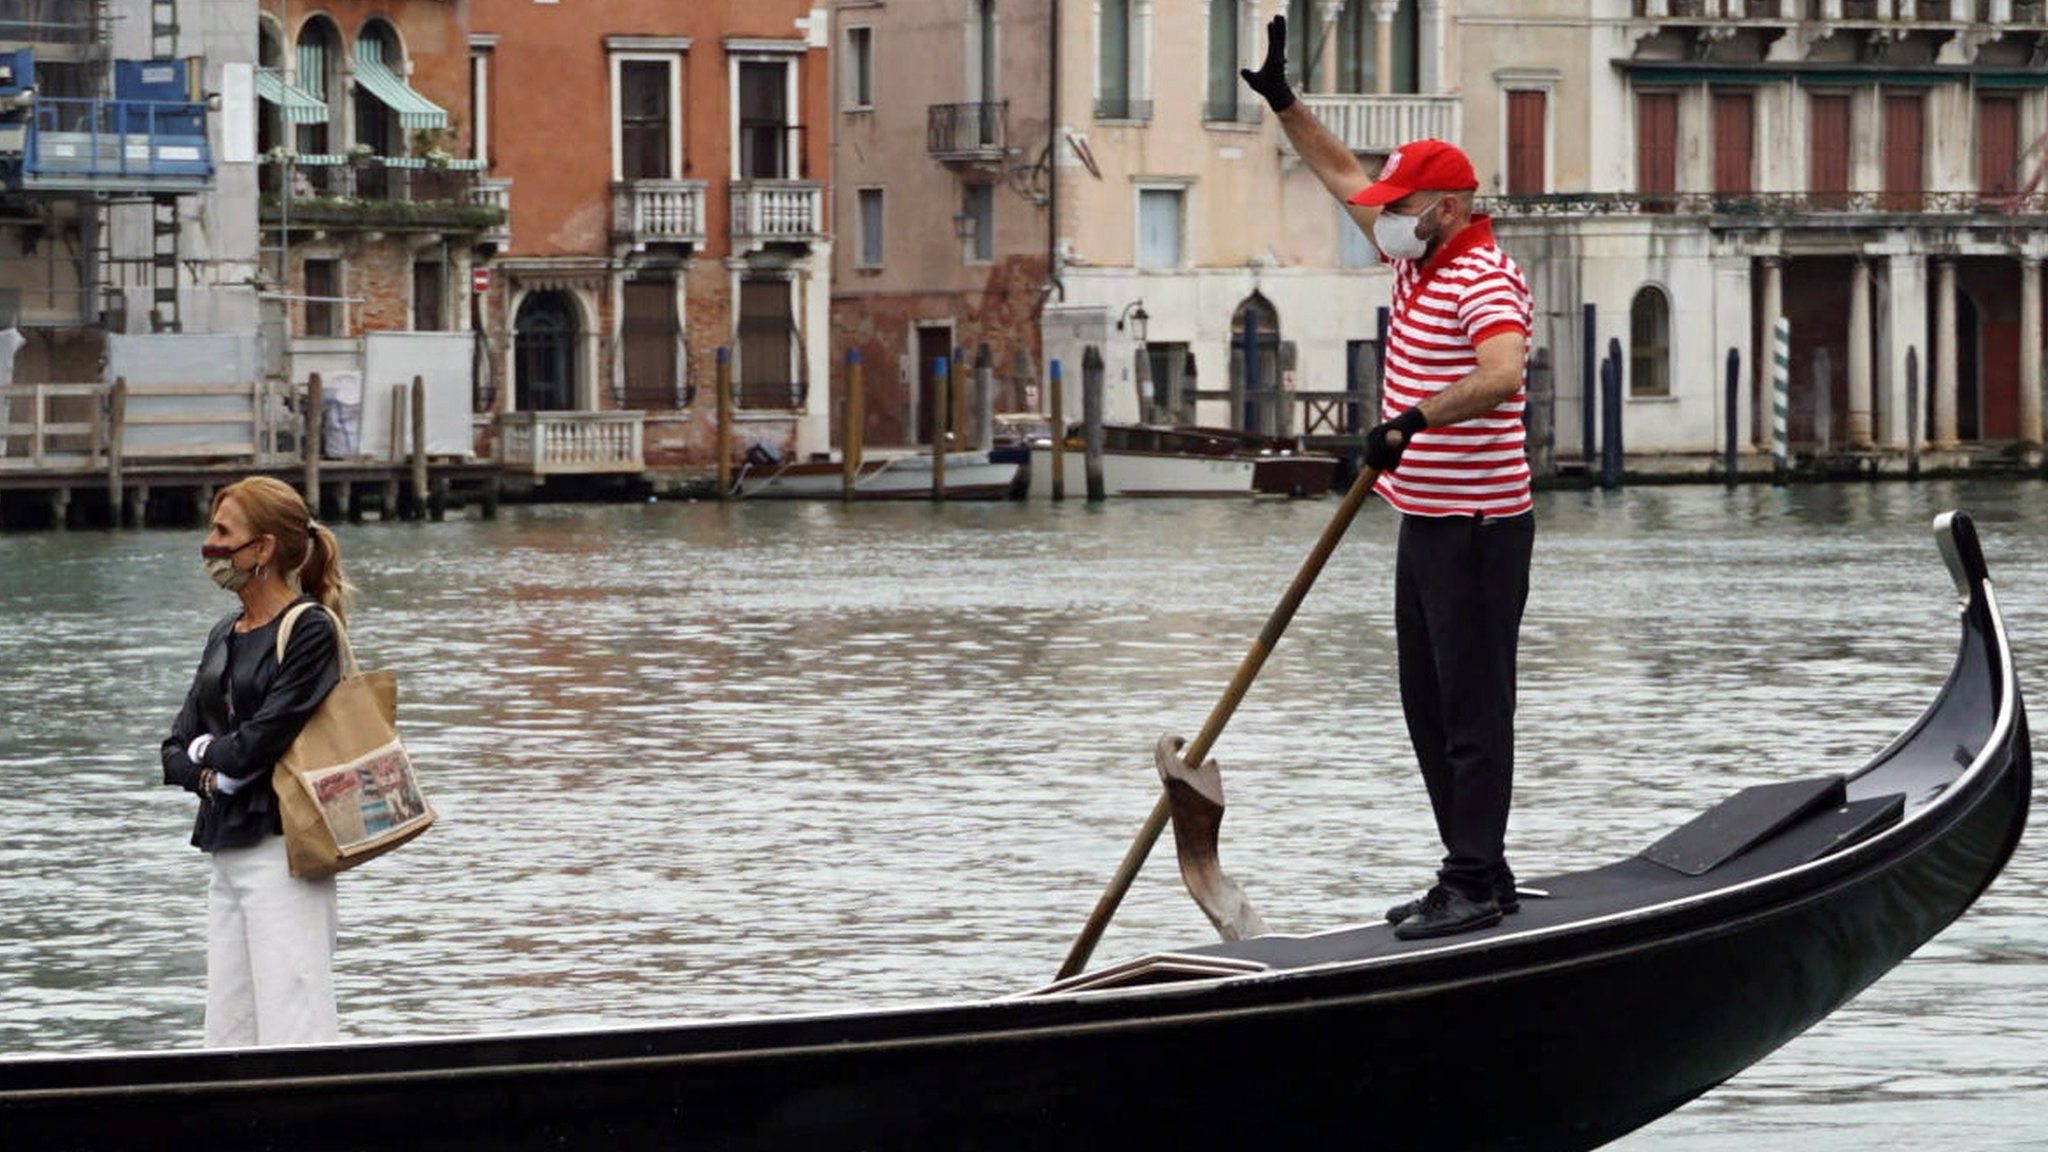 A gondolier on the Grand Canal in Venice, Italy, 18 May 2020